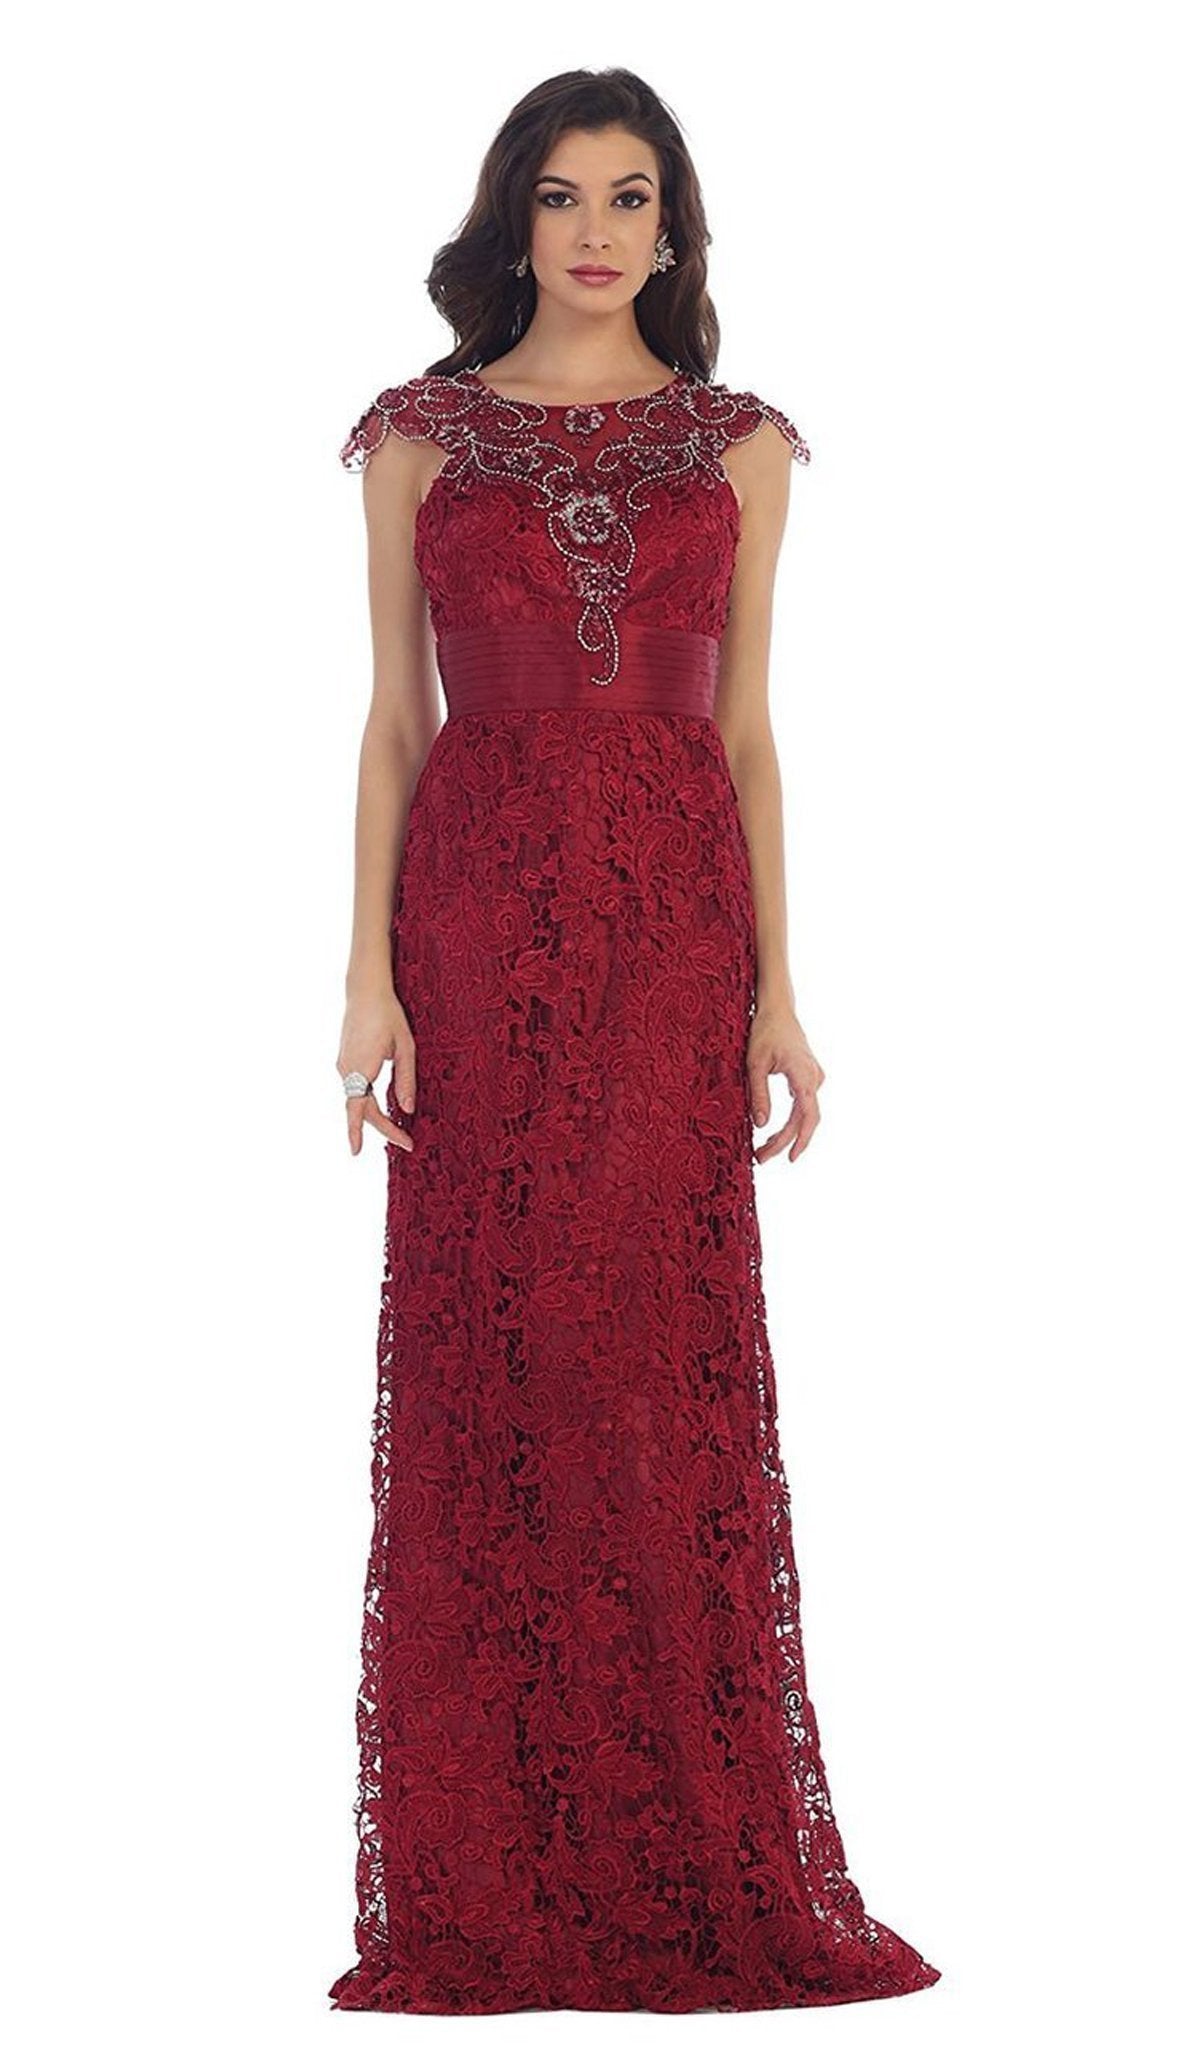 Image of May Queen - RQ7182 Rhinestone Lace Floral Evening Gown